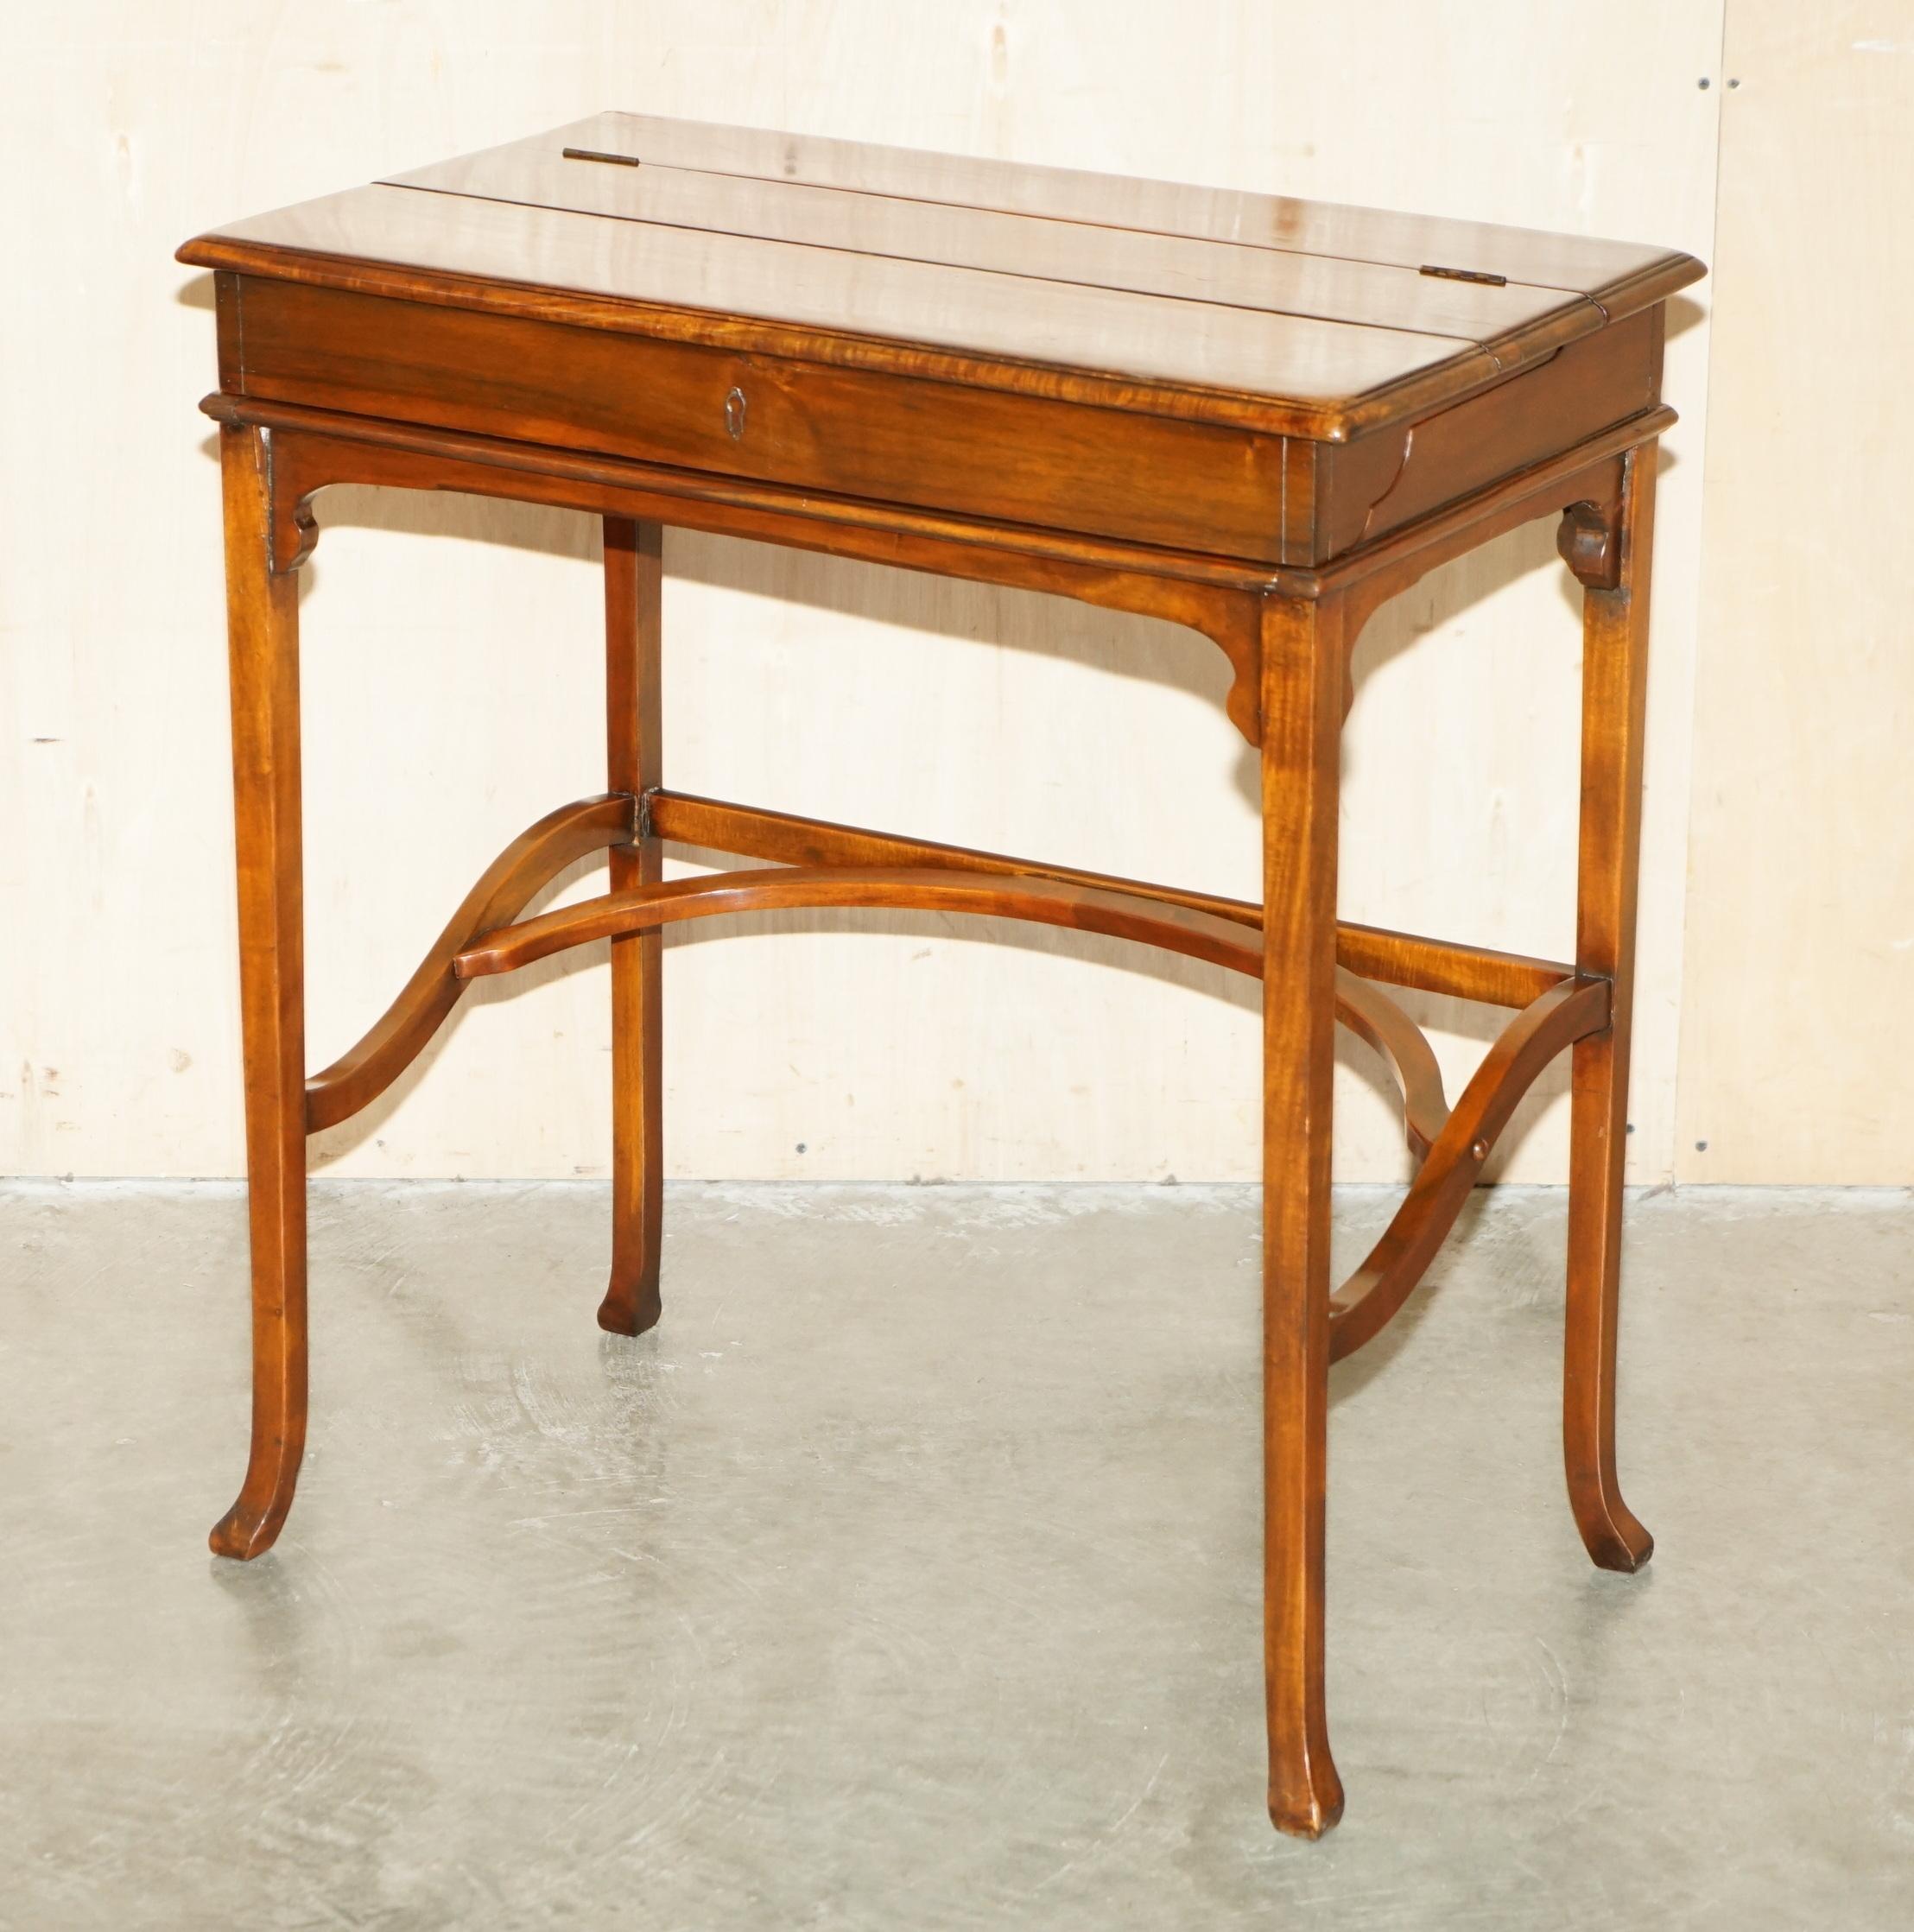 Royal House Antiques

Royal House Antiques is delighted to offer for sale this lovely Military Campaign style home office desk / workstation made by Theodore Alexander and finished with their famous brown leather embossed top

Please note the